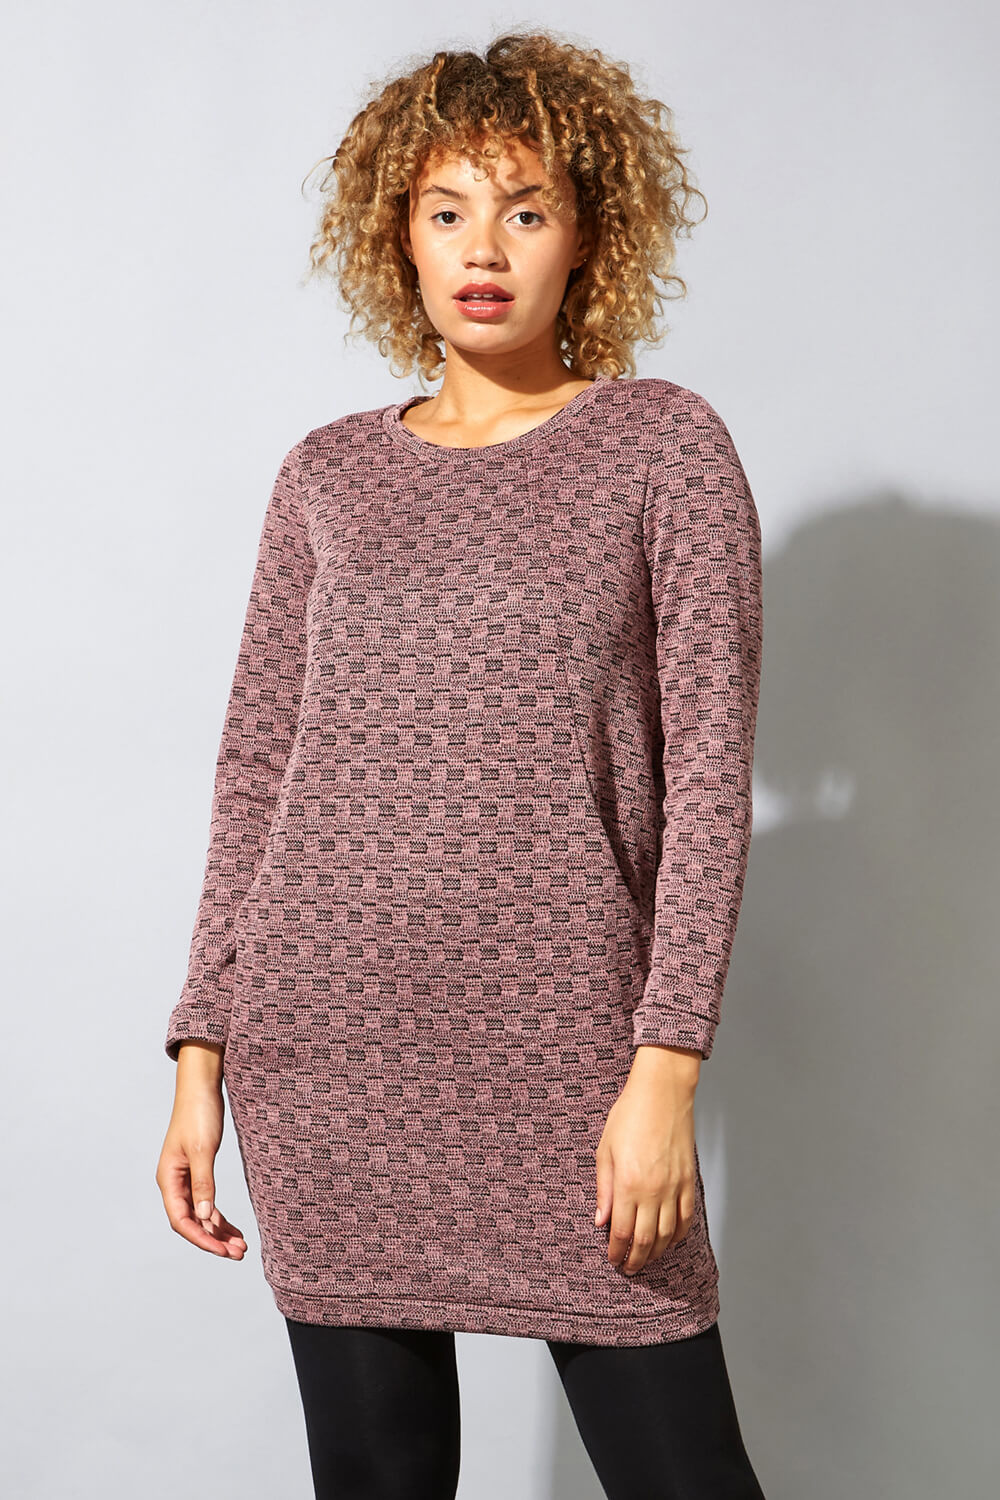 PINK Check Detail Textured Tunic Dress, Image 4 of 5